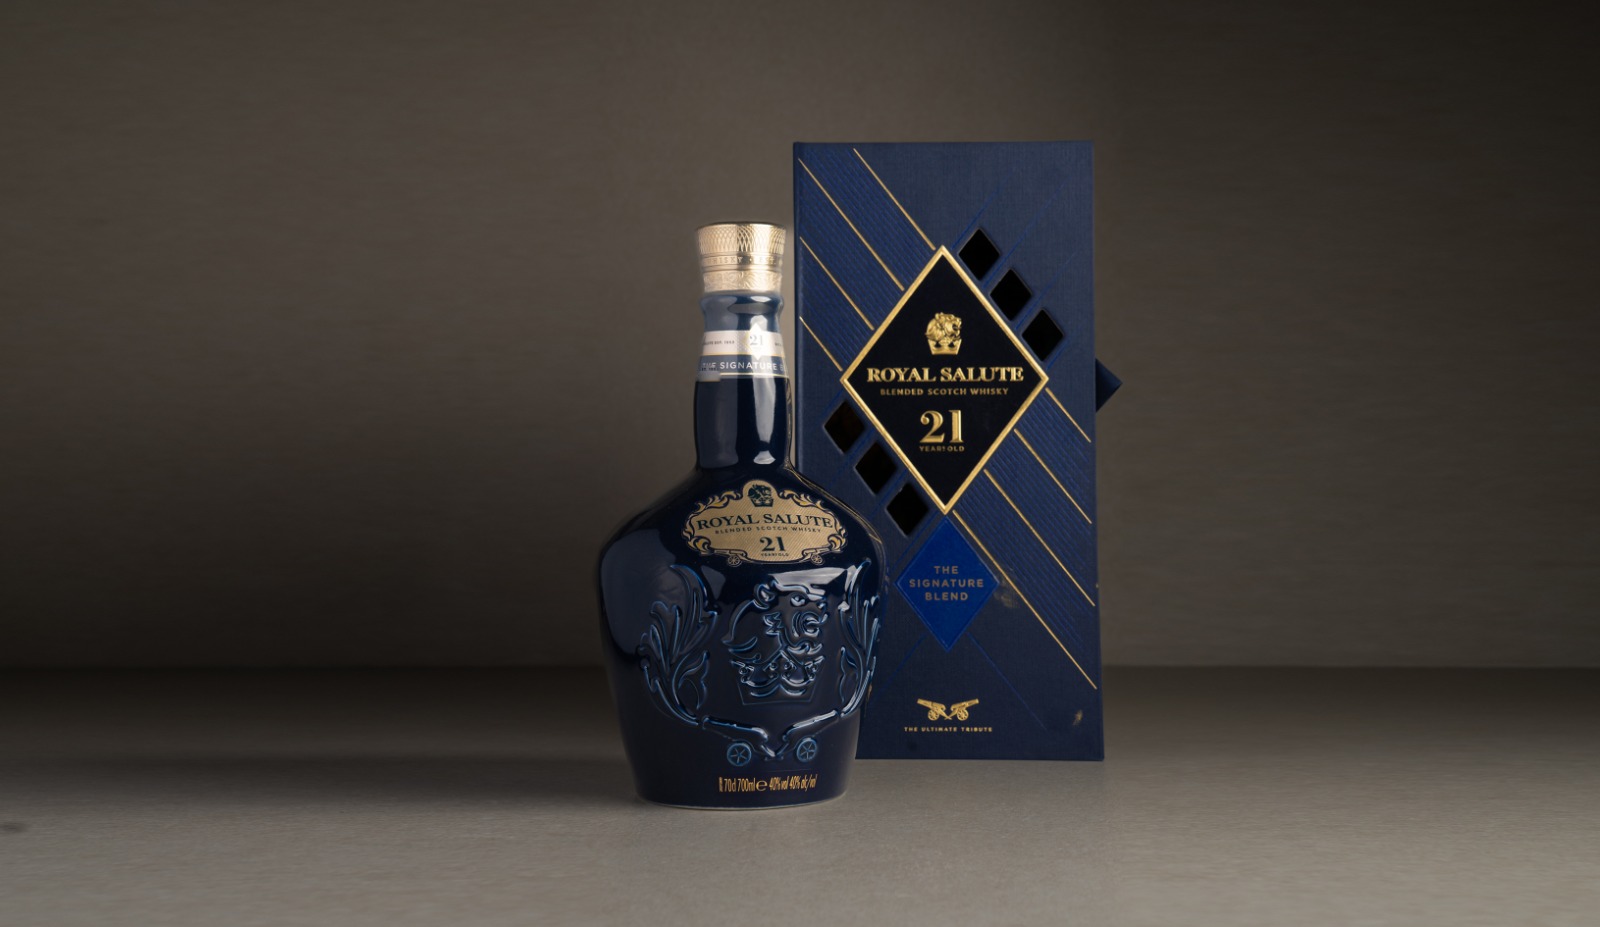 Royal Salute 21 years blue